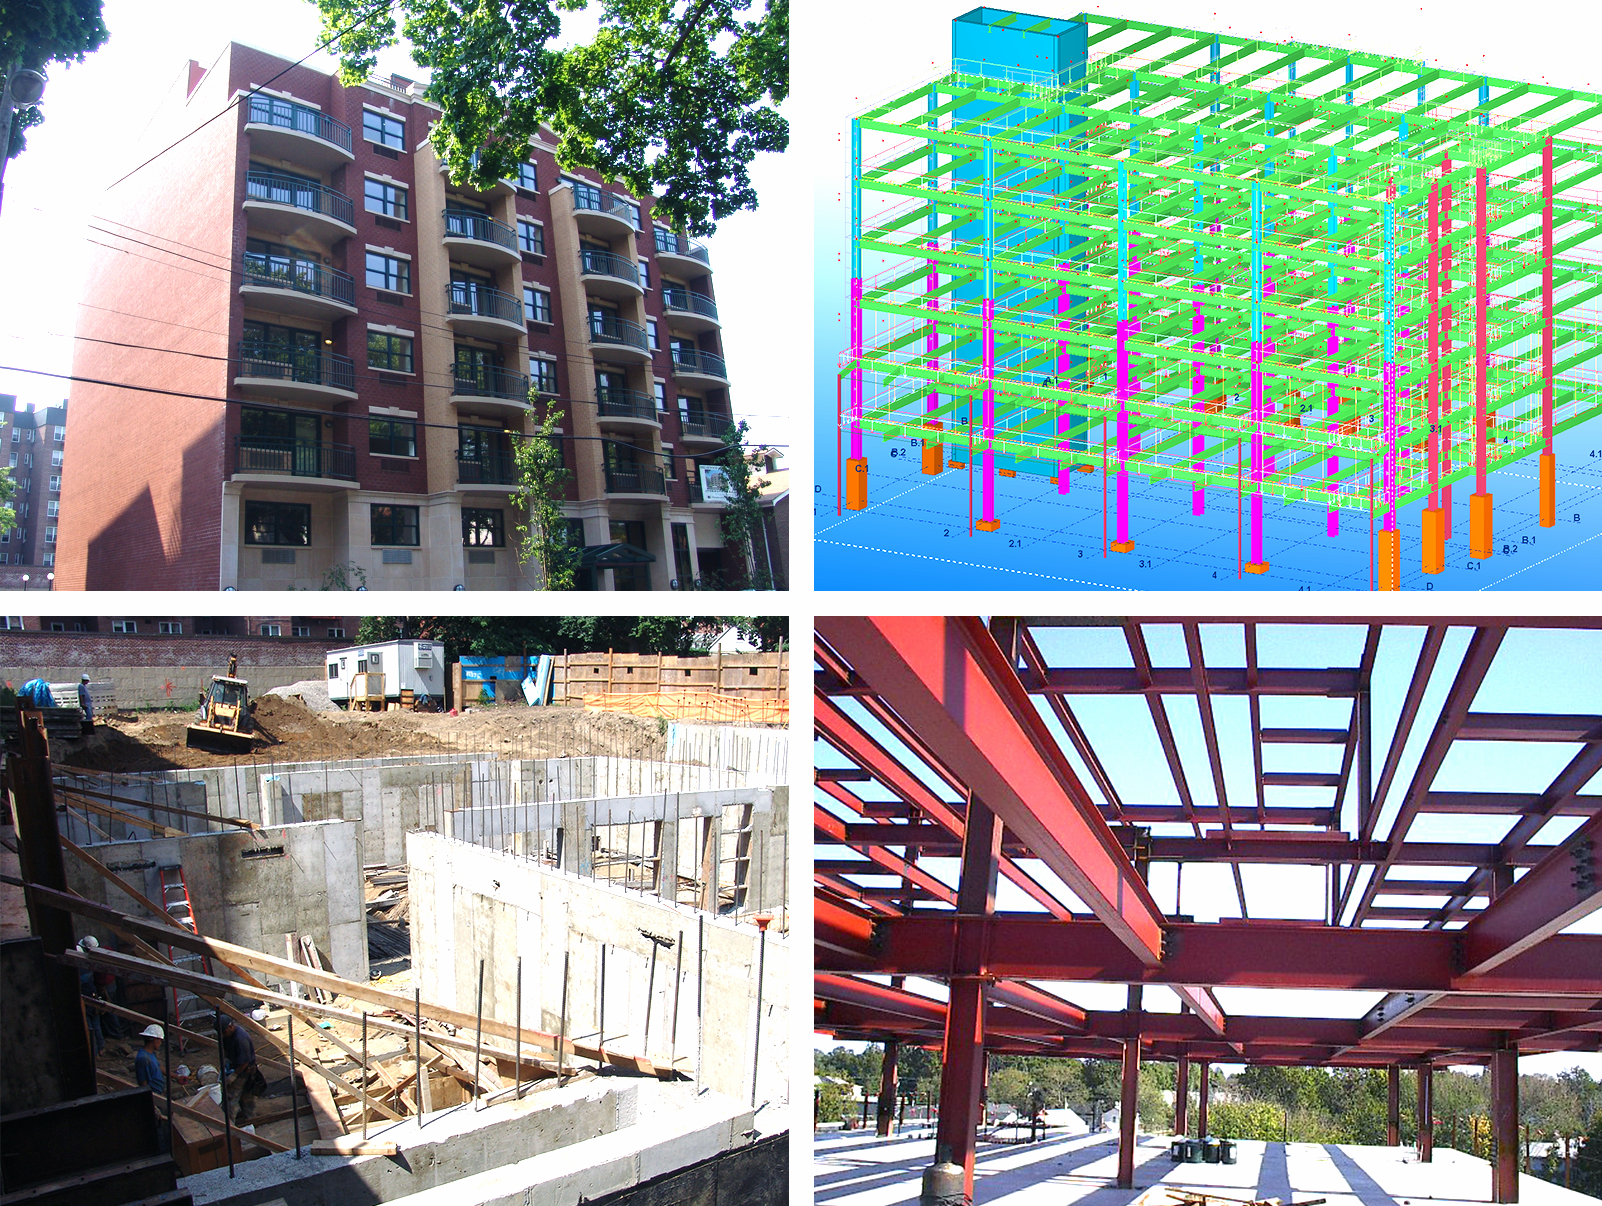   QUEENS DEVELOPMENT   Construction support services included the review and approval of pre-cast concrete planks, shoring and erection means and methods, and design and detailing of unforeseen conditions during construction.&nbsp;    